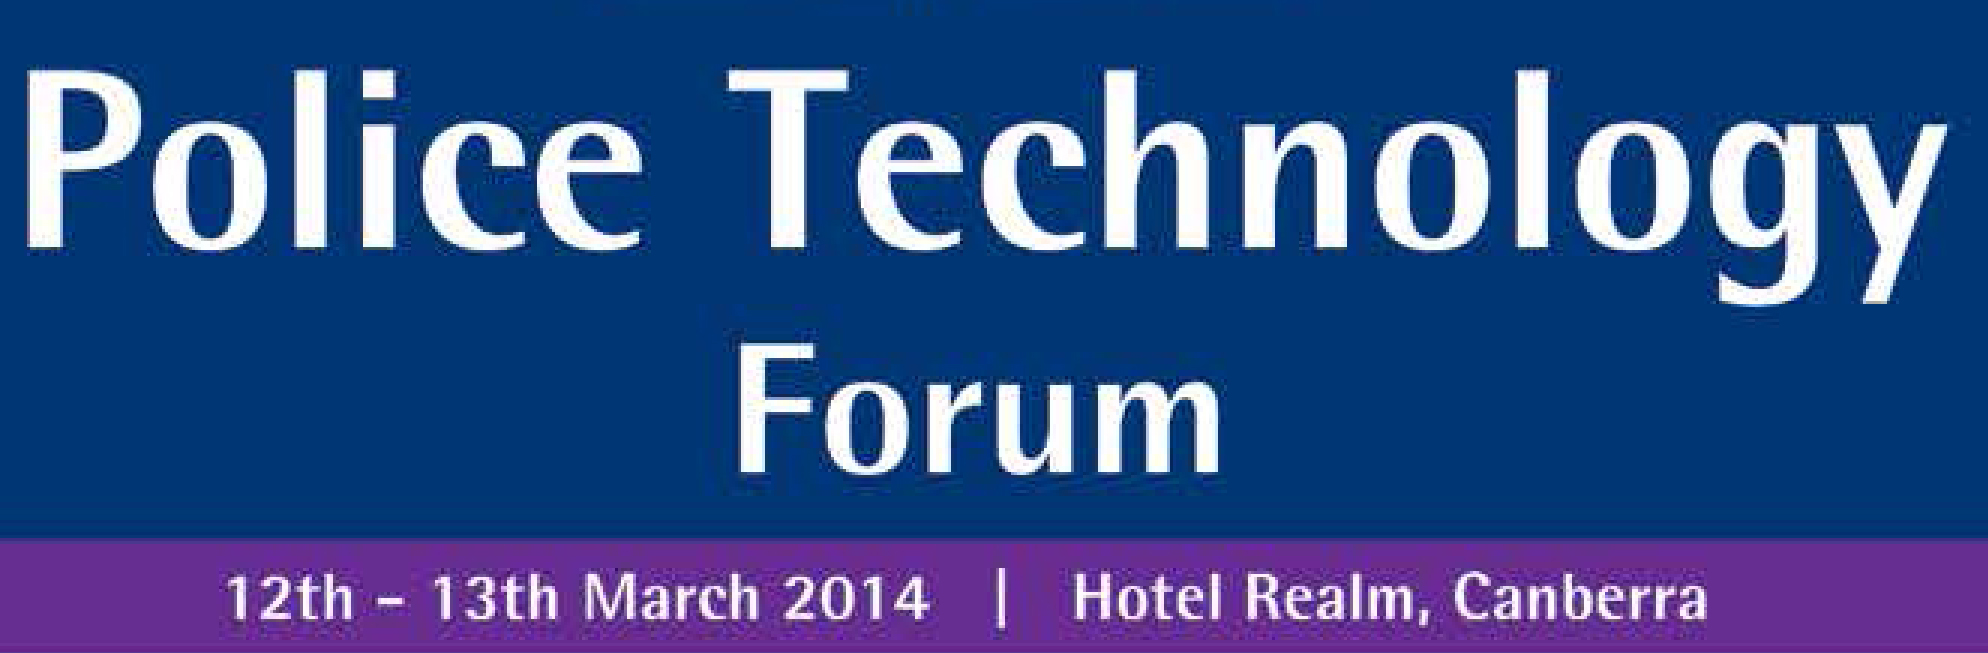 Police Technology Forum Canberra